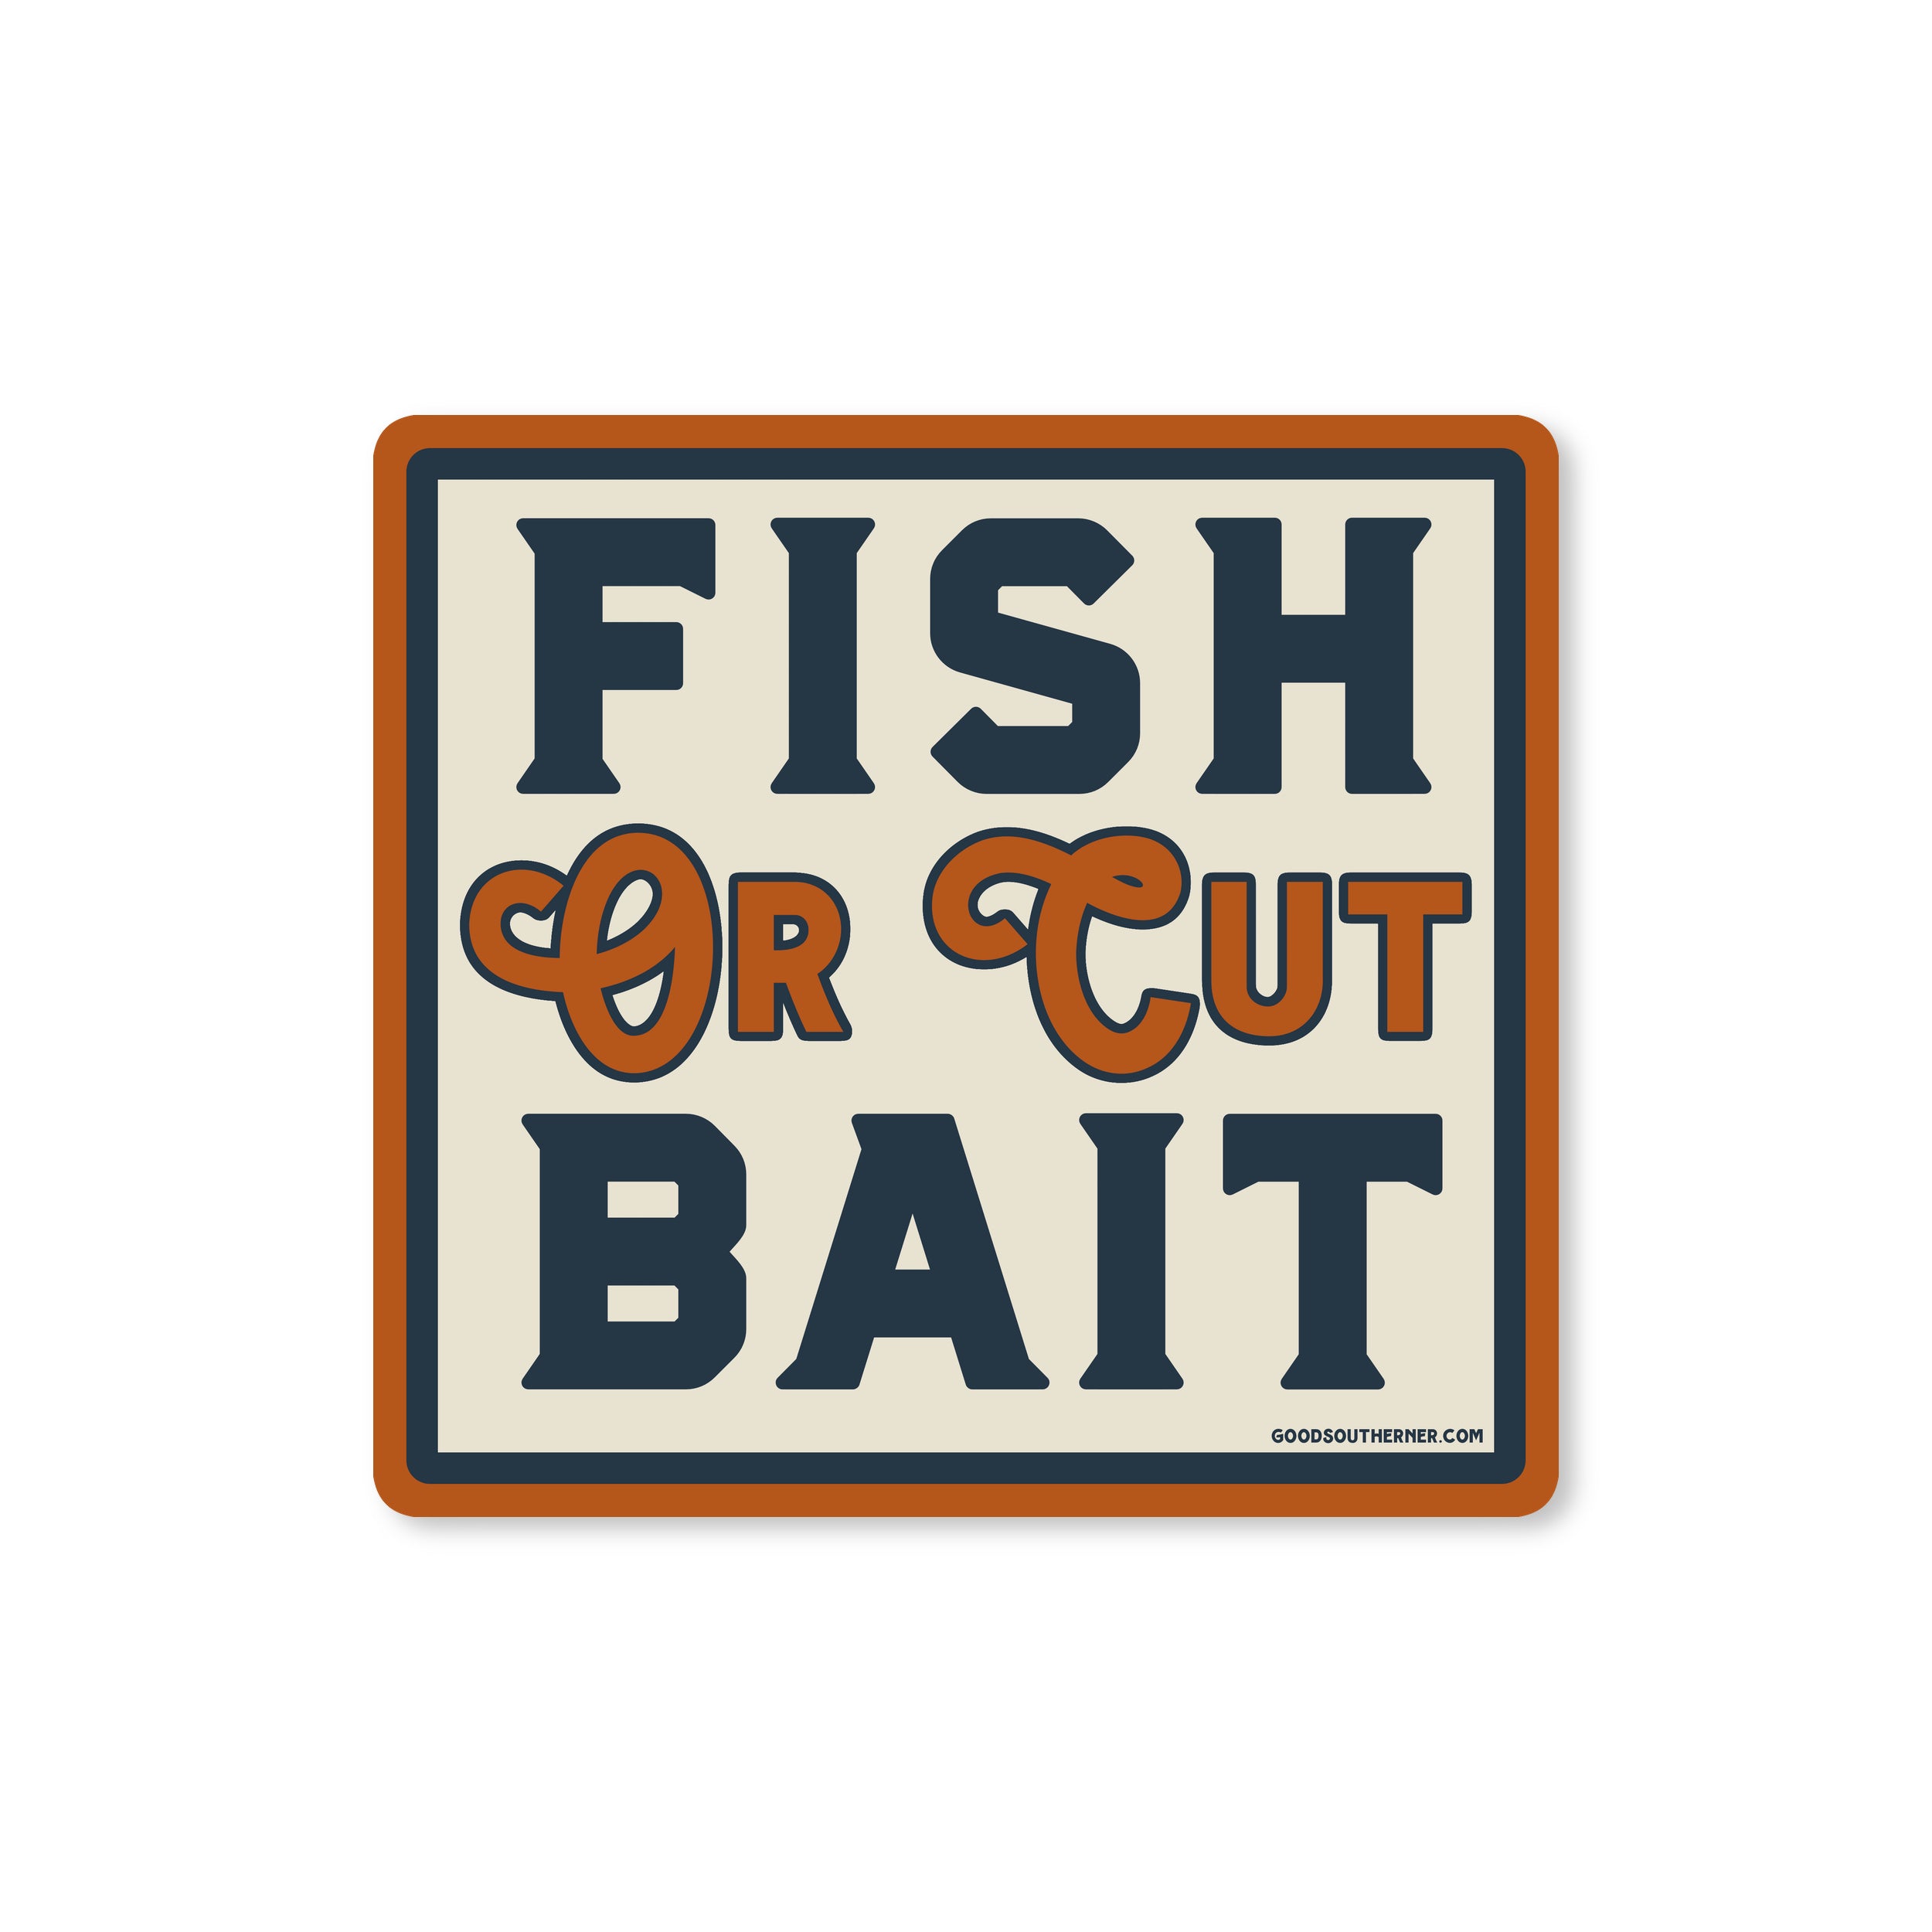 Fish or Cut Bait Sticker – Good Southerner